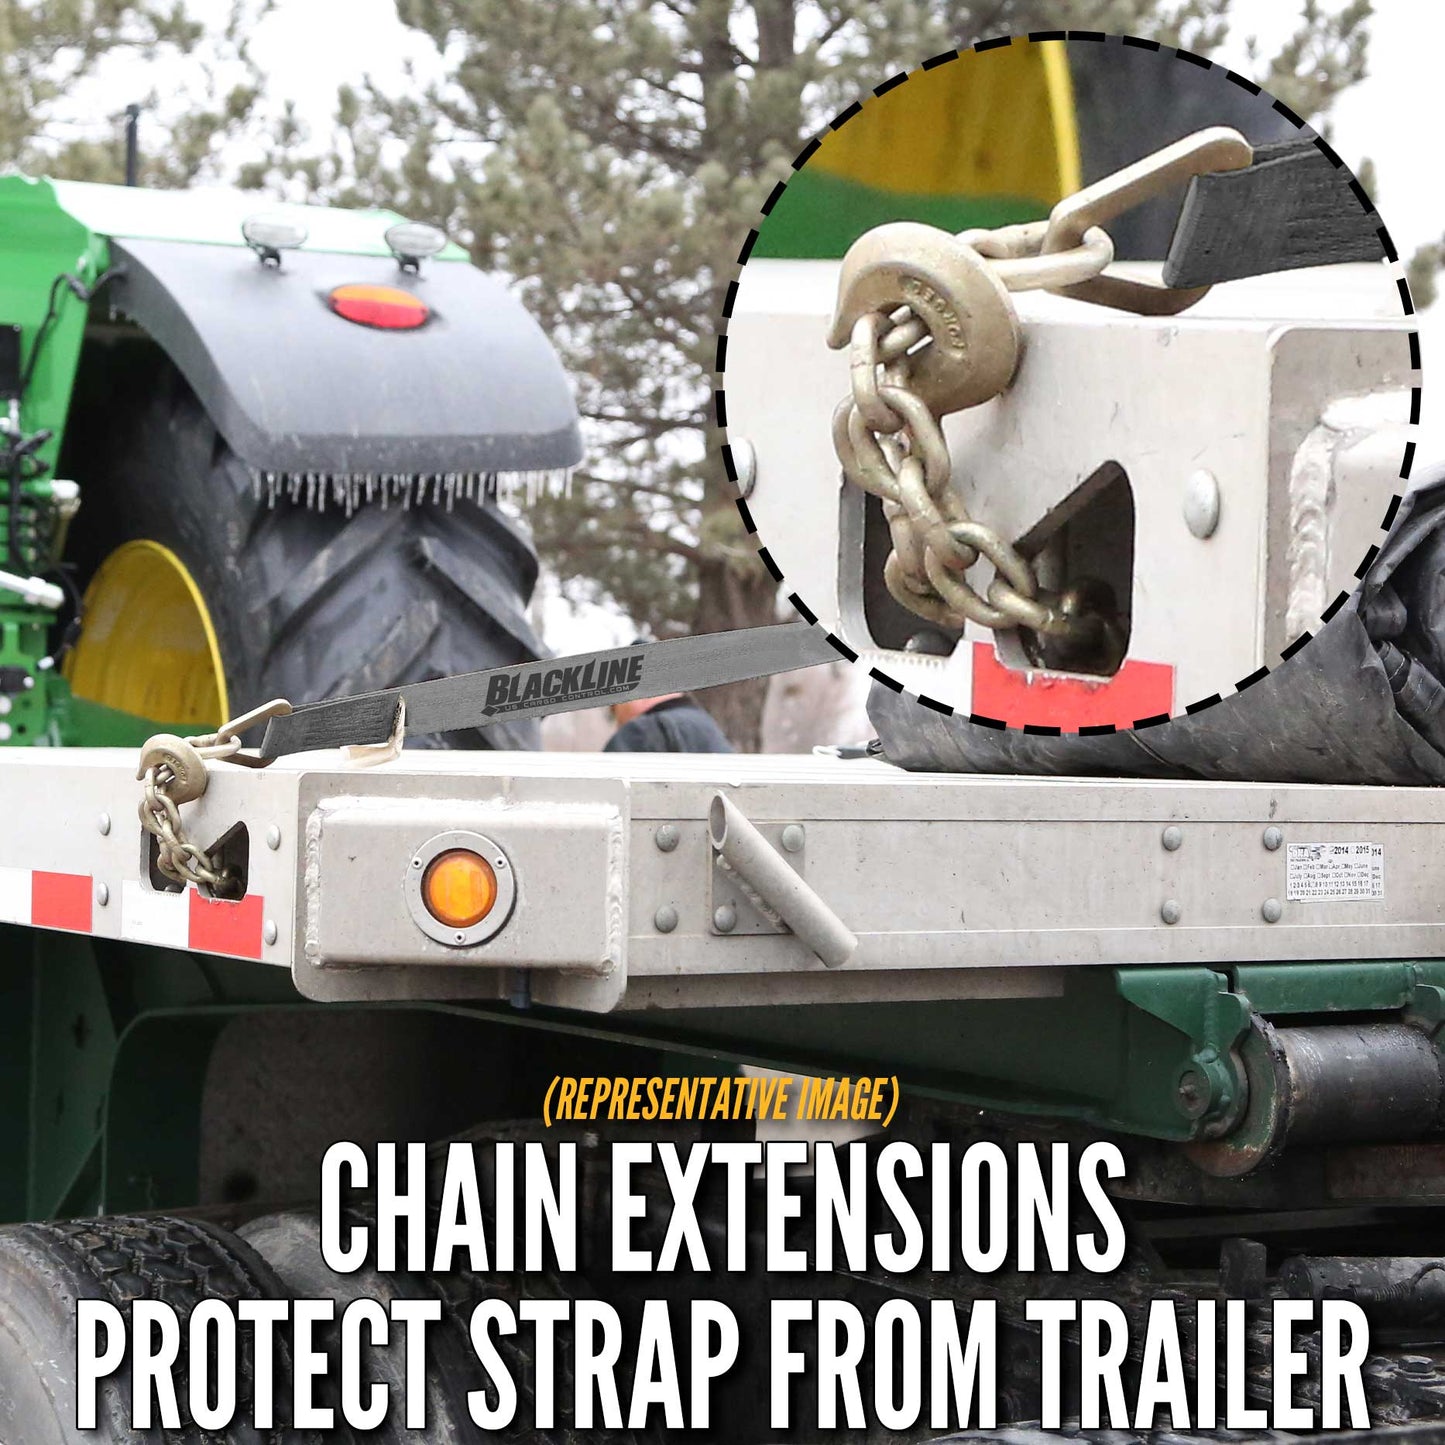 3.75' BlackLine chain extensions protect strap